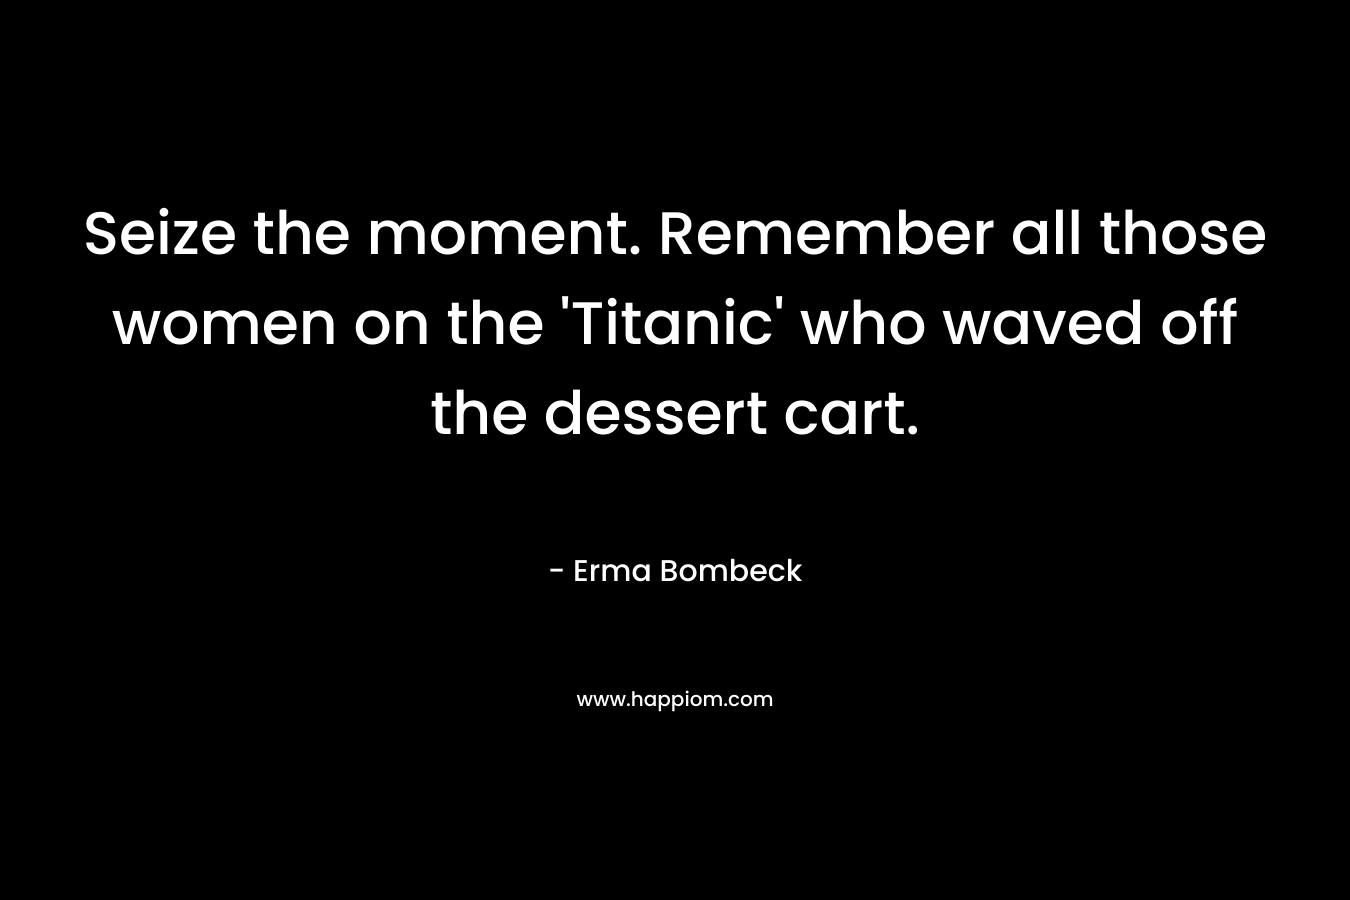 Seize the moment. Remember all those women on the ‘Titanic’ who waved off the dessert cart. – Erma Bombeck